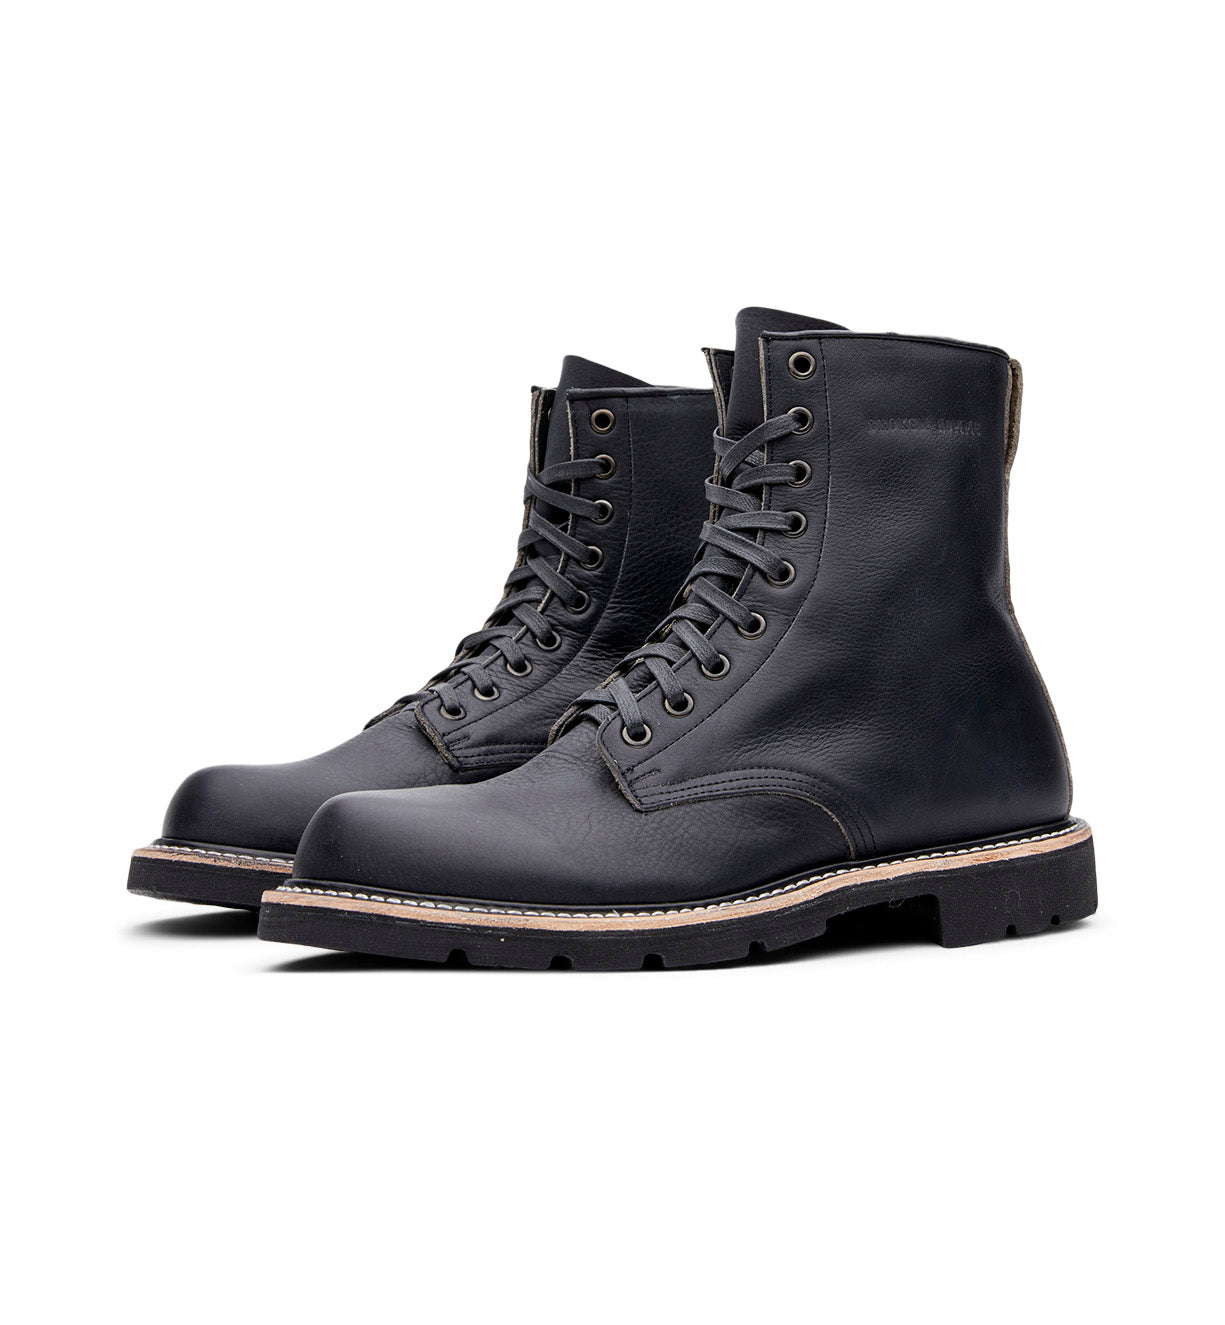 A pair of Jacob boots from Broken Homme, with a rubber sole, made in the USA.